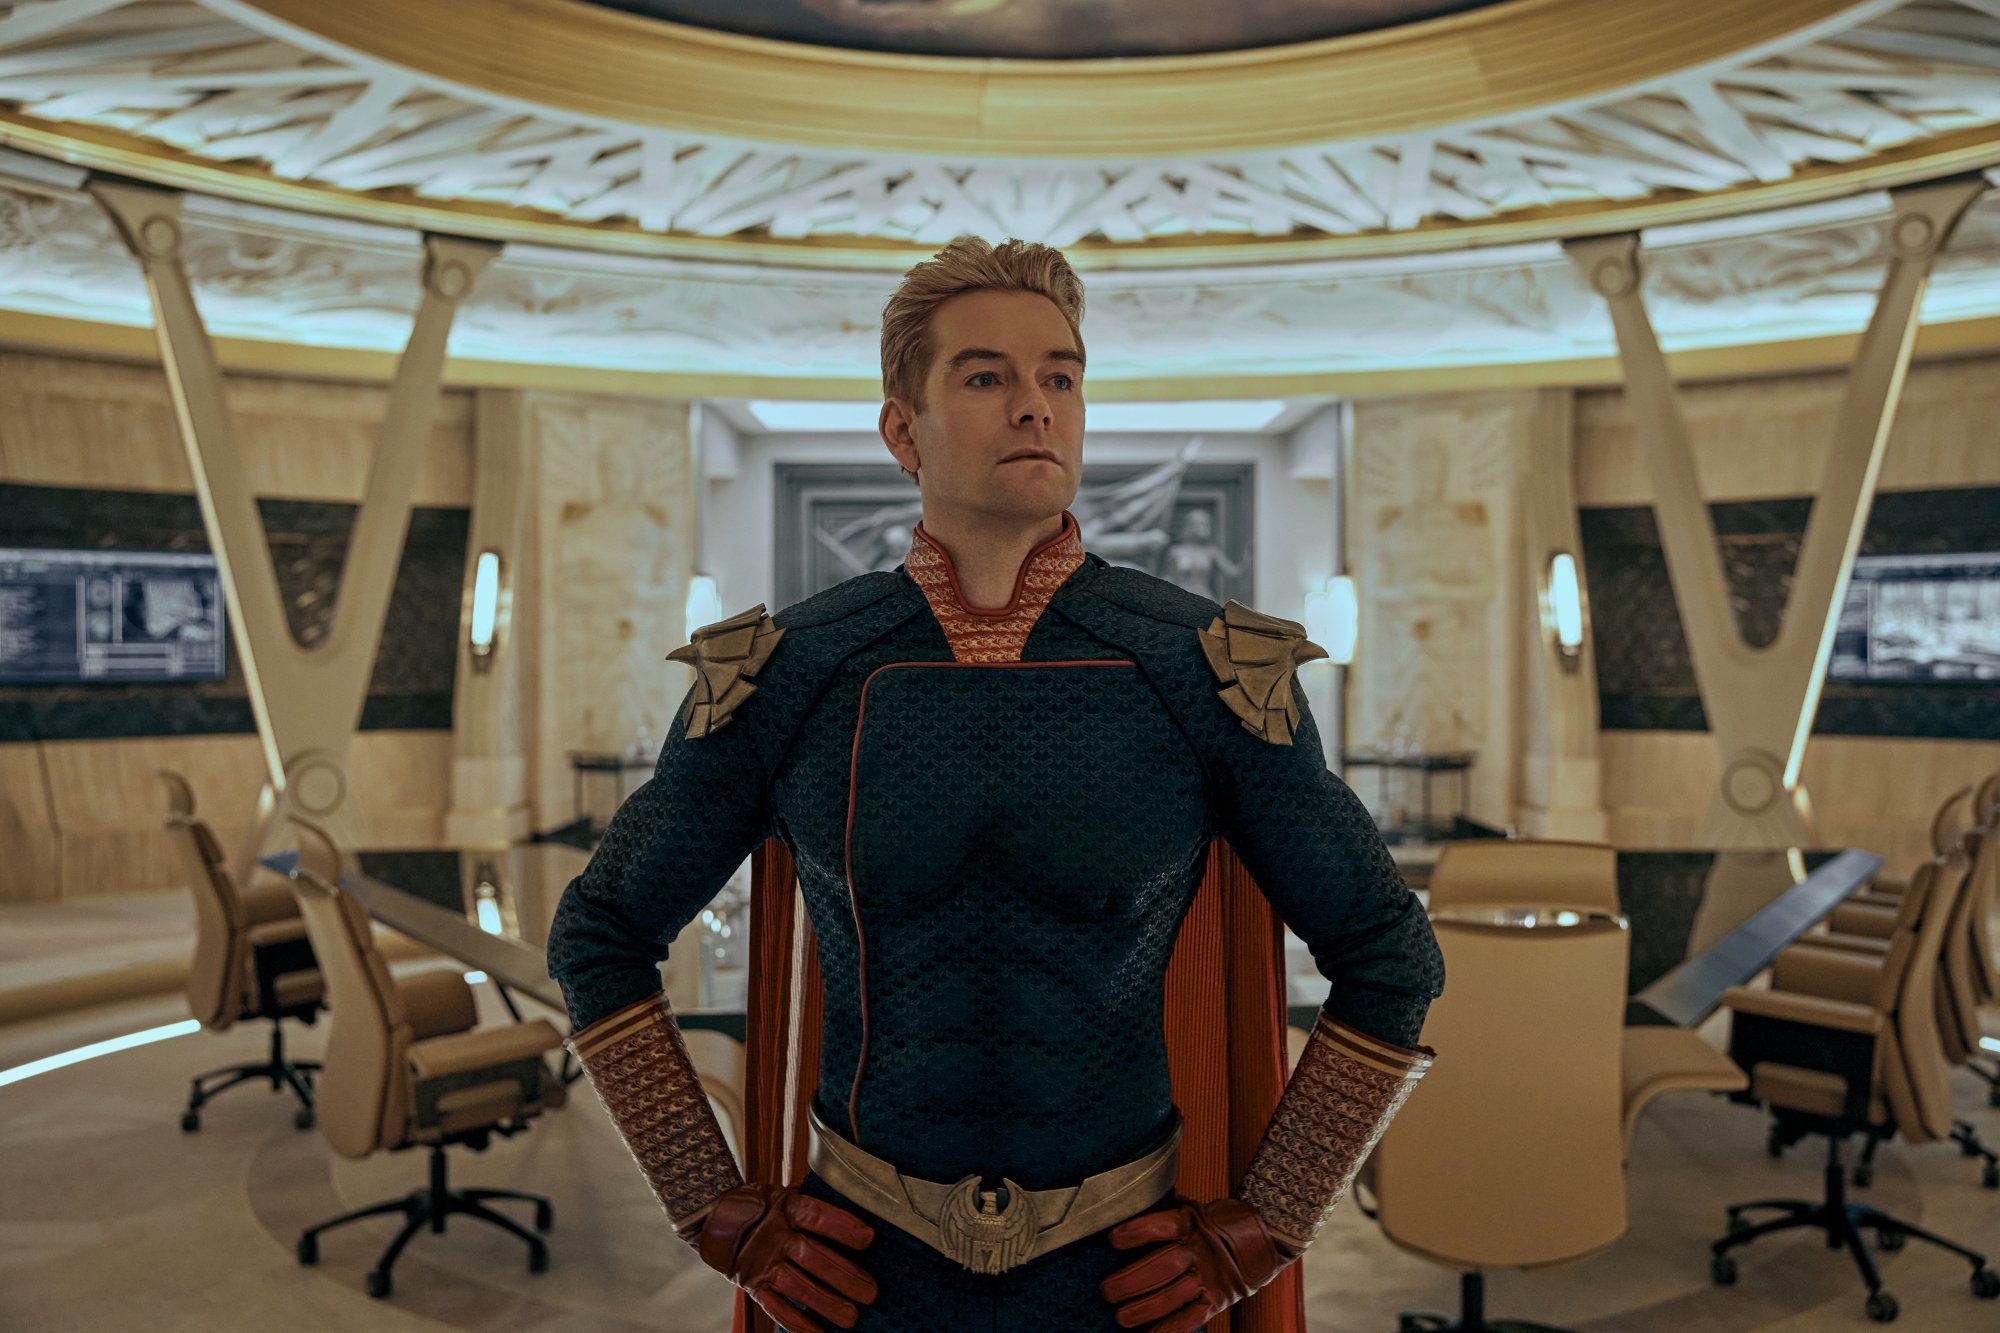 'The Boys' Season 3 Antony Starr as Homelander wearing his costume in a meeting room with his hands on his hips